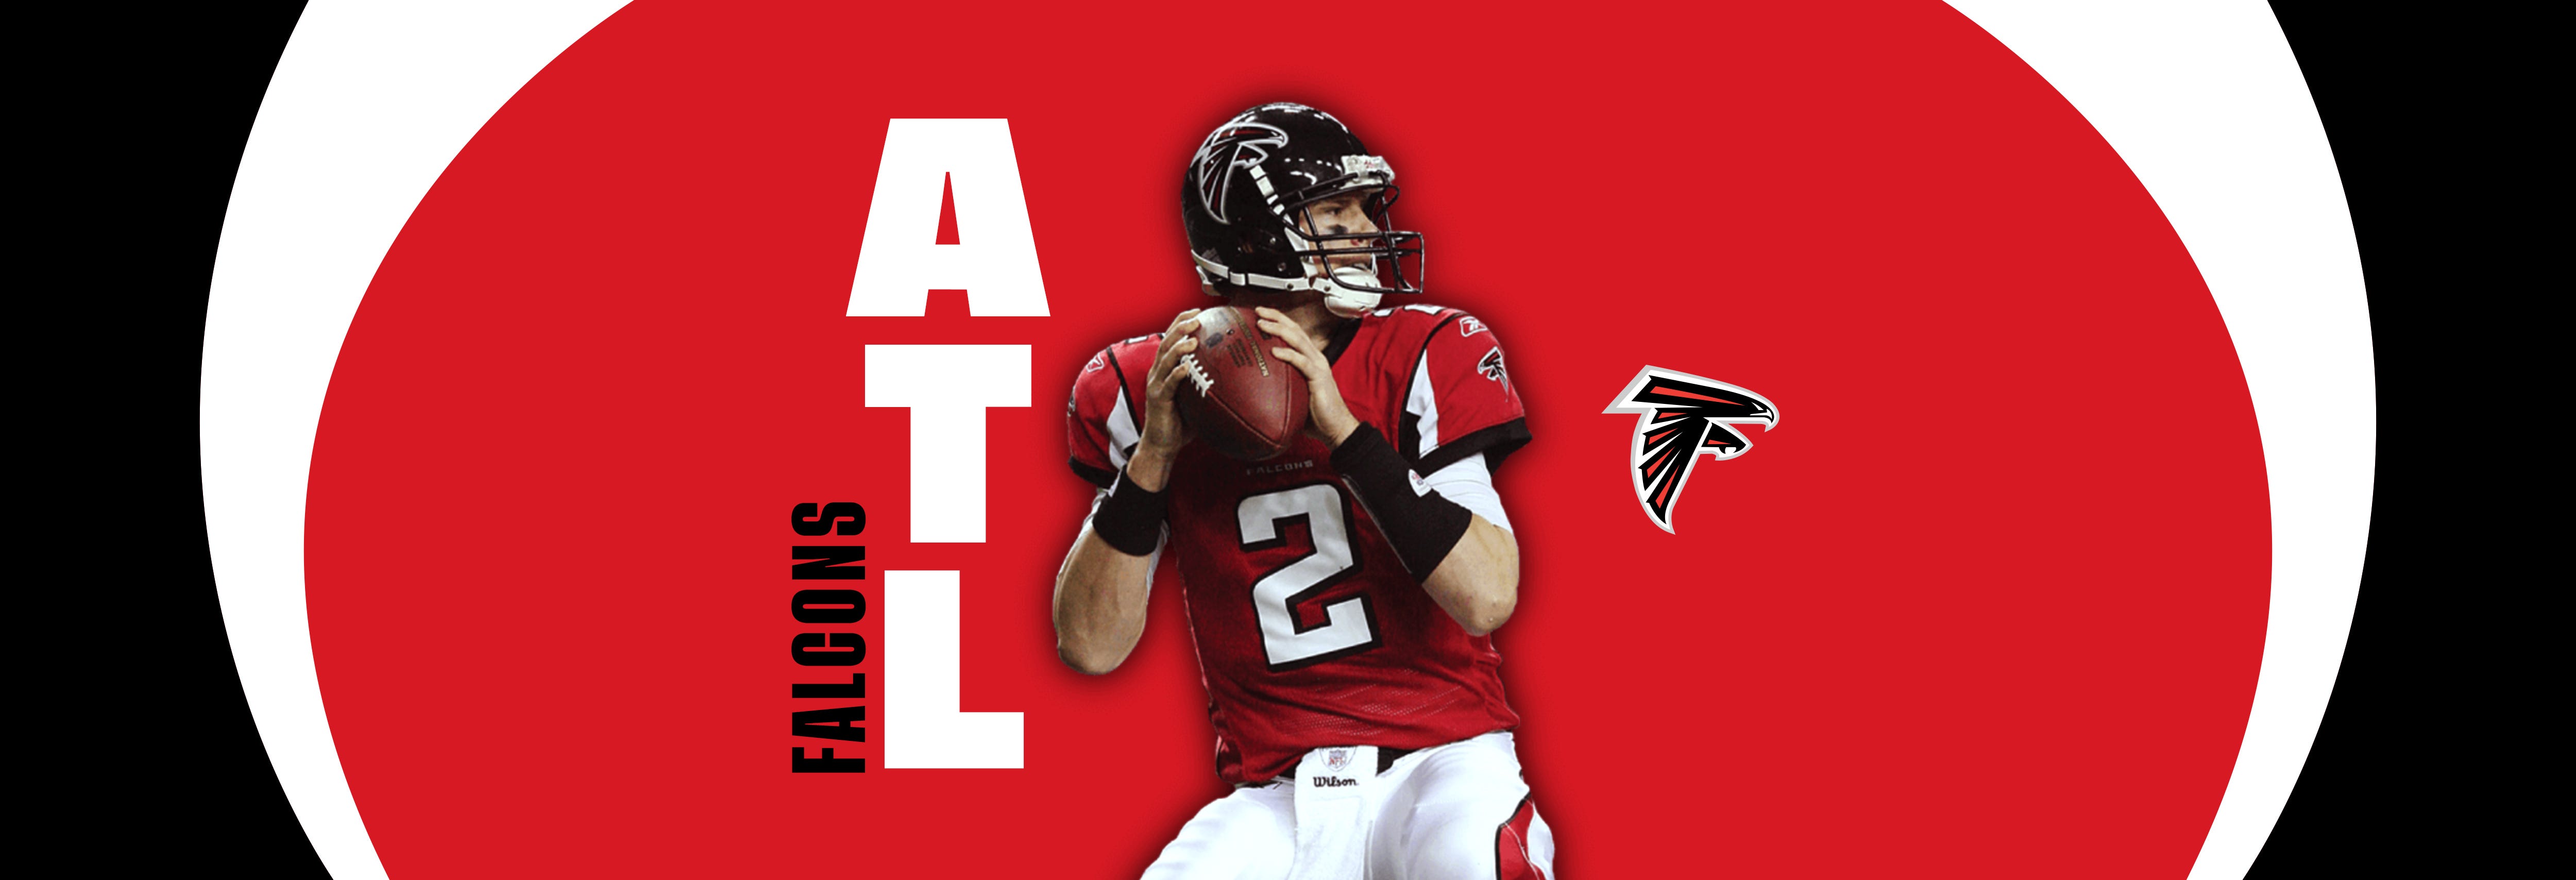 Why The Atlanta Falcons Have The NFL's Best Uniform, by Brandon Moore, Graphic Language